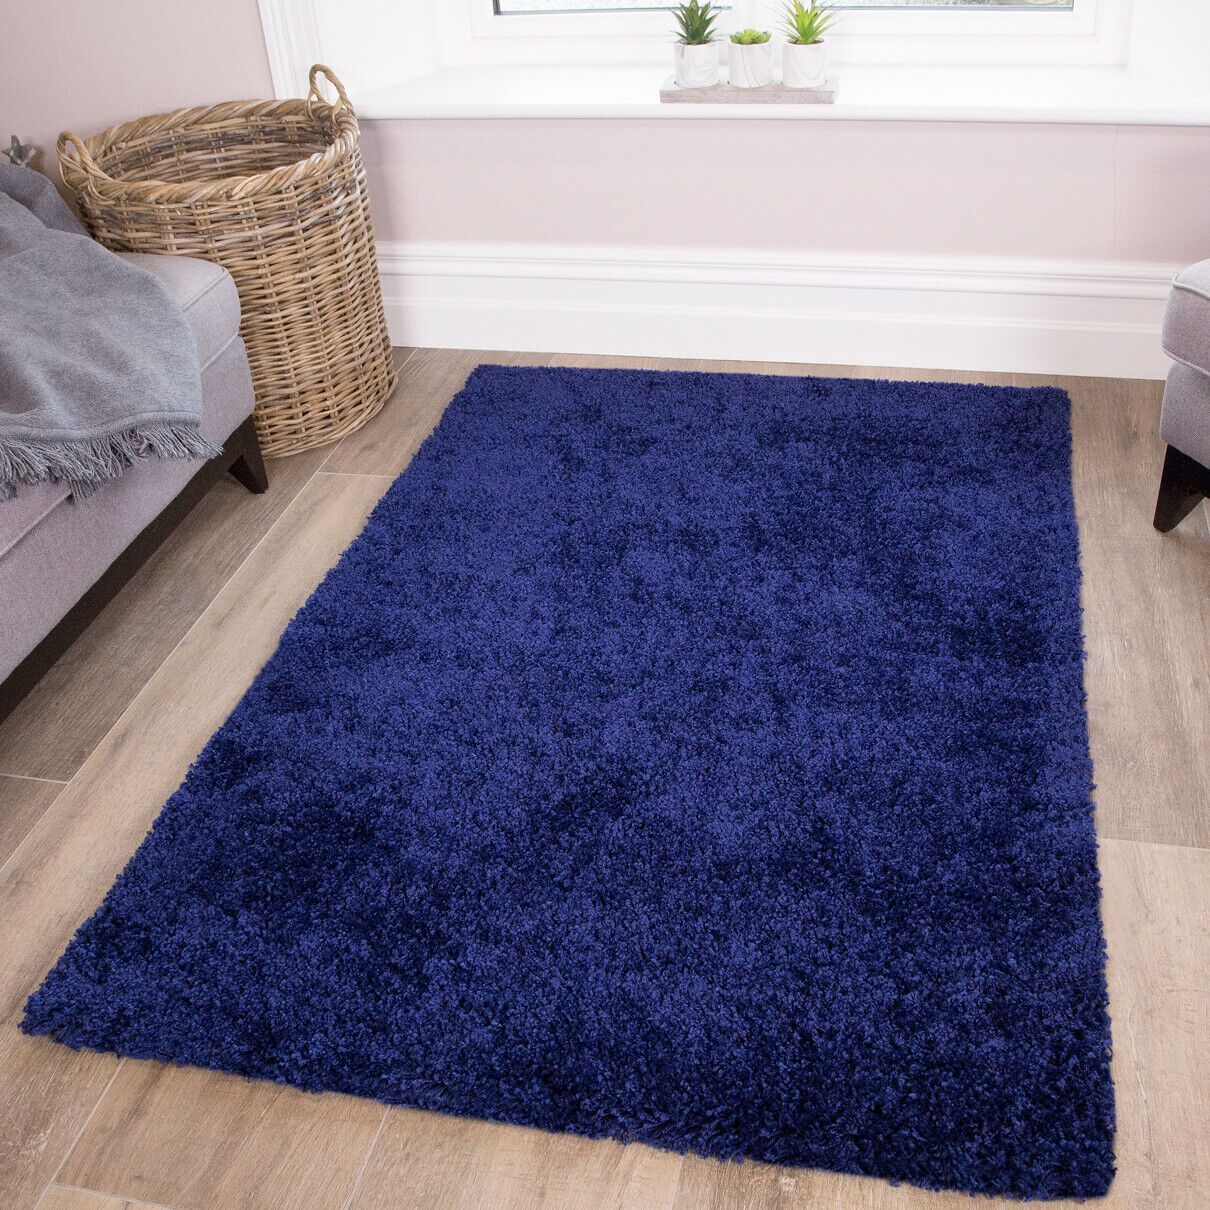 Navy Blue Soft Touch Easy To Clean Living Room Shaggy Rug Cheap Thick Large  Rugs | Ebay In Dark Blue Rugs (View 7 of 15)